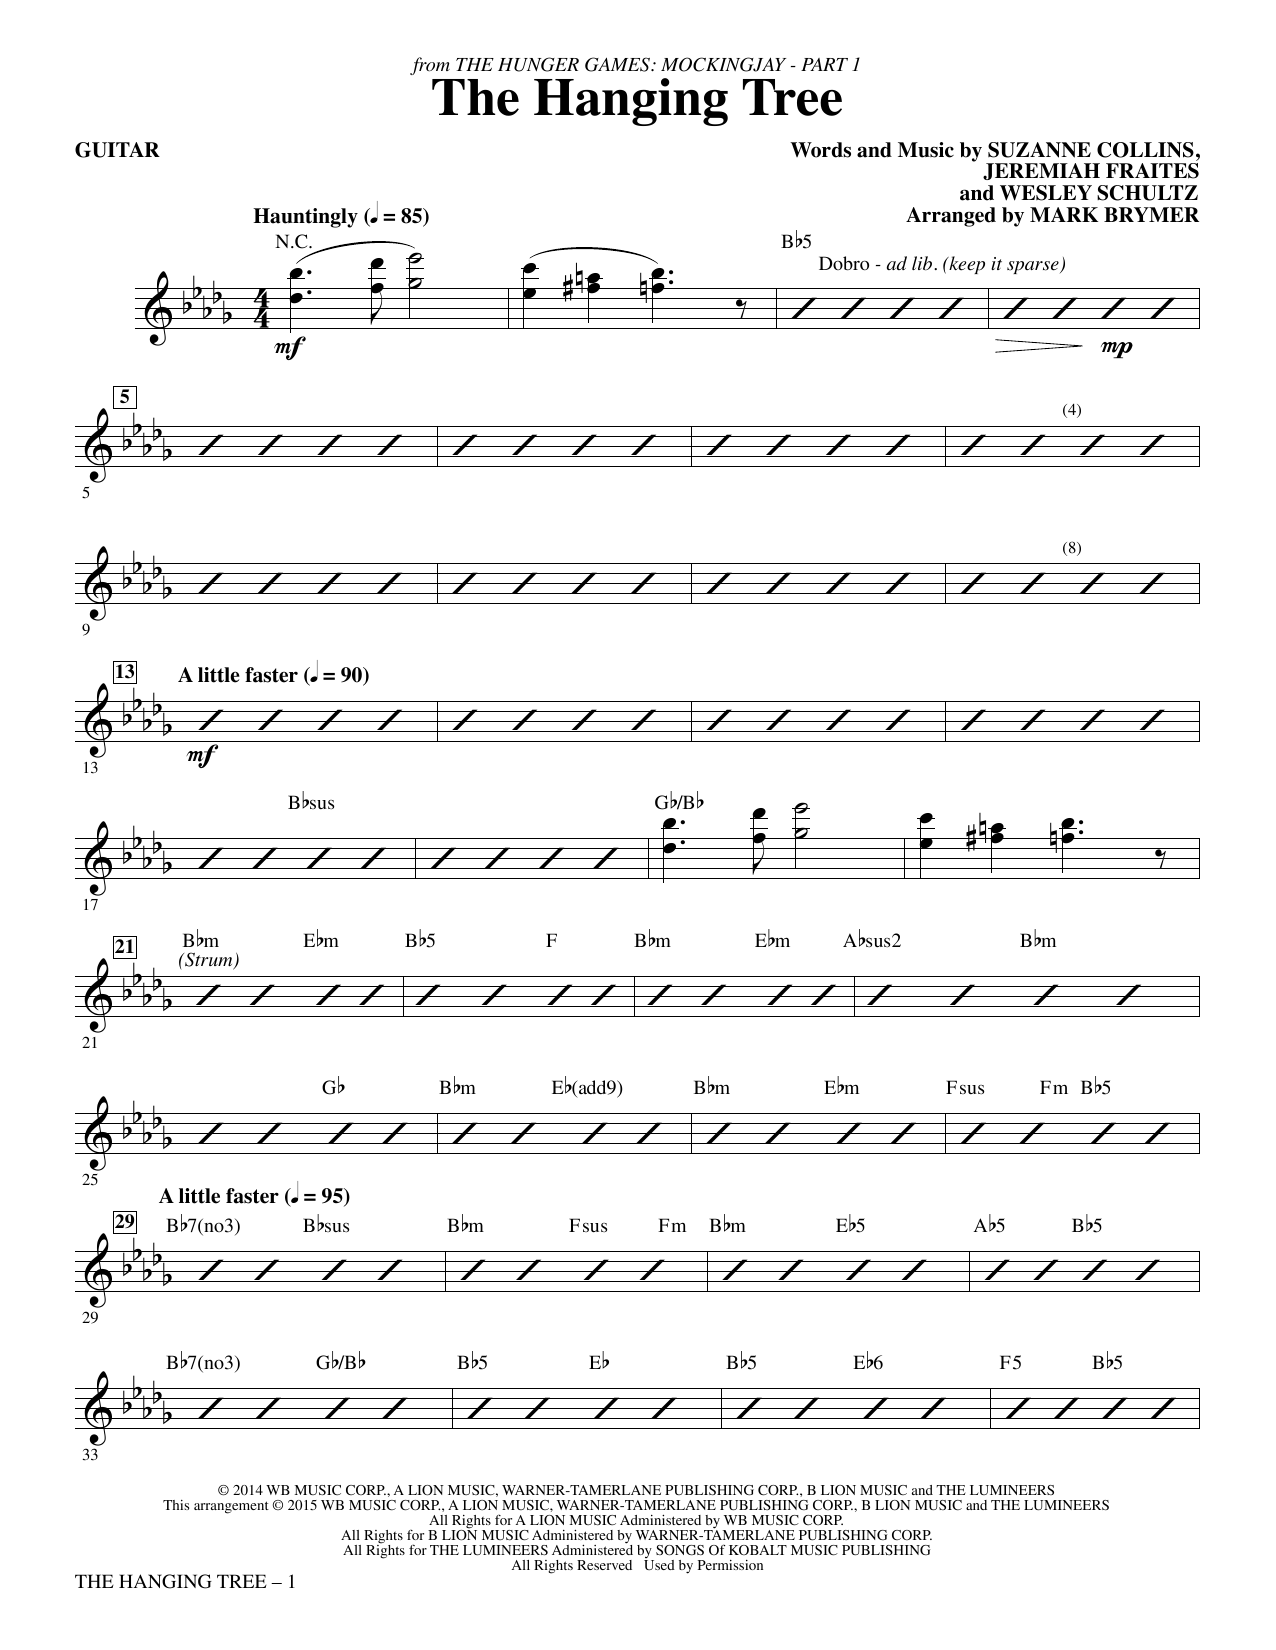 Mark Brymer The Hanging Tree (from The Hunger Games: Mockingjay Part I) - Guitar sheet music notes and chords. Download Printable PDF.